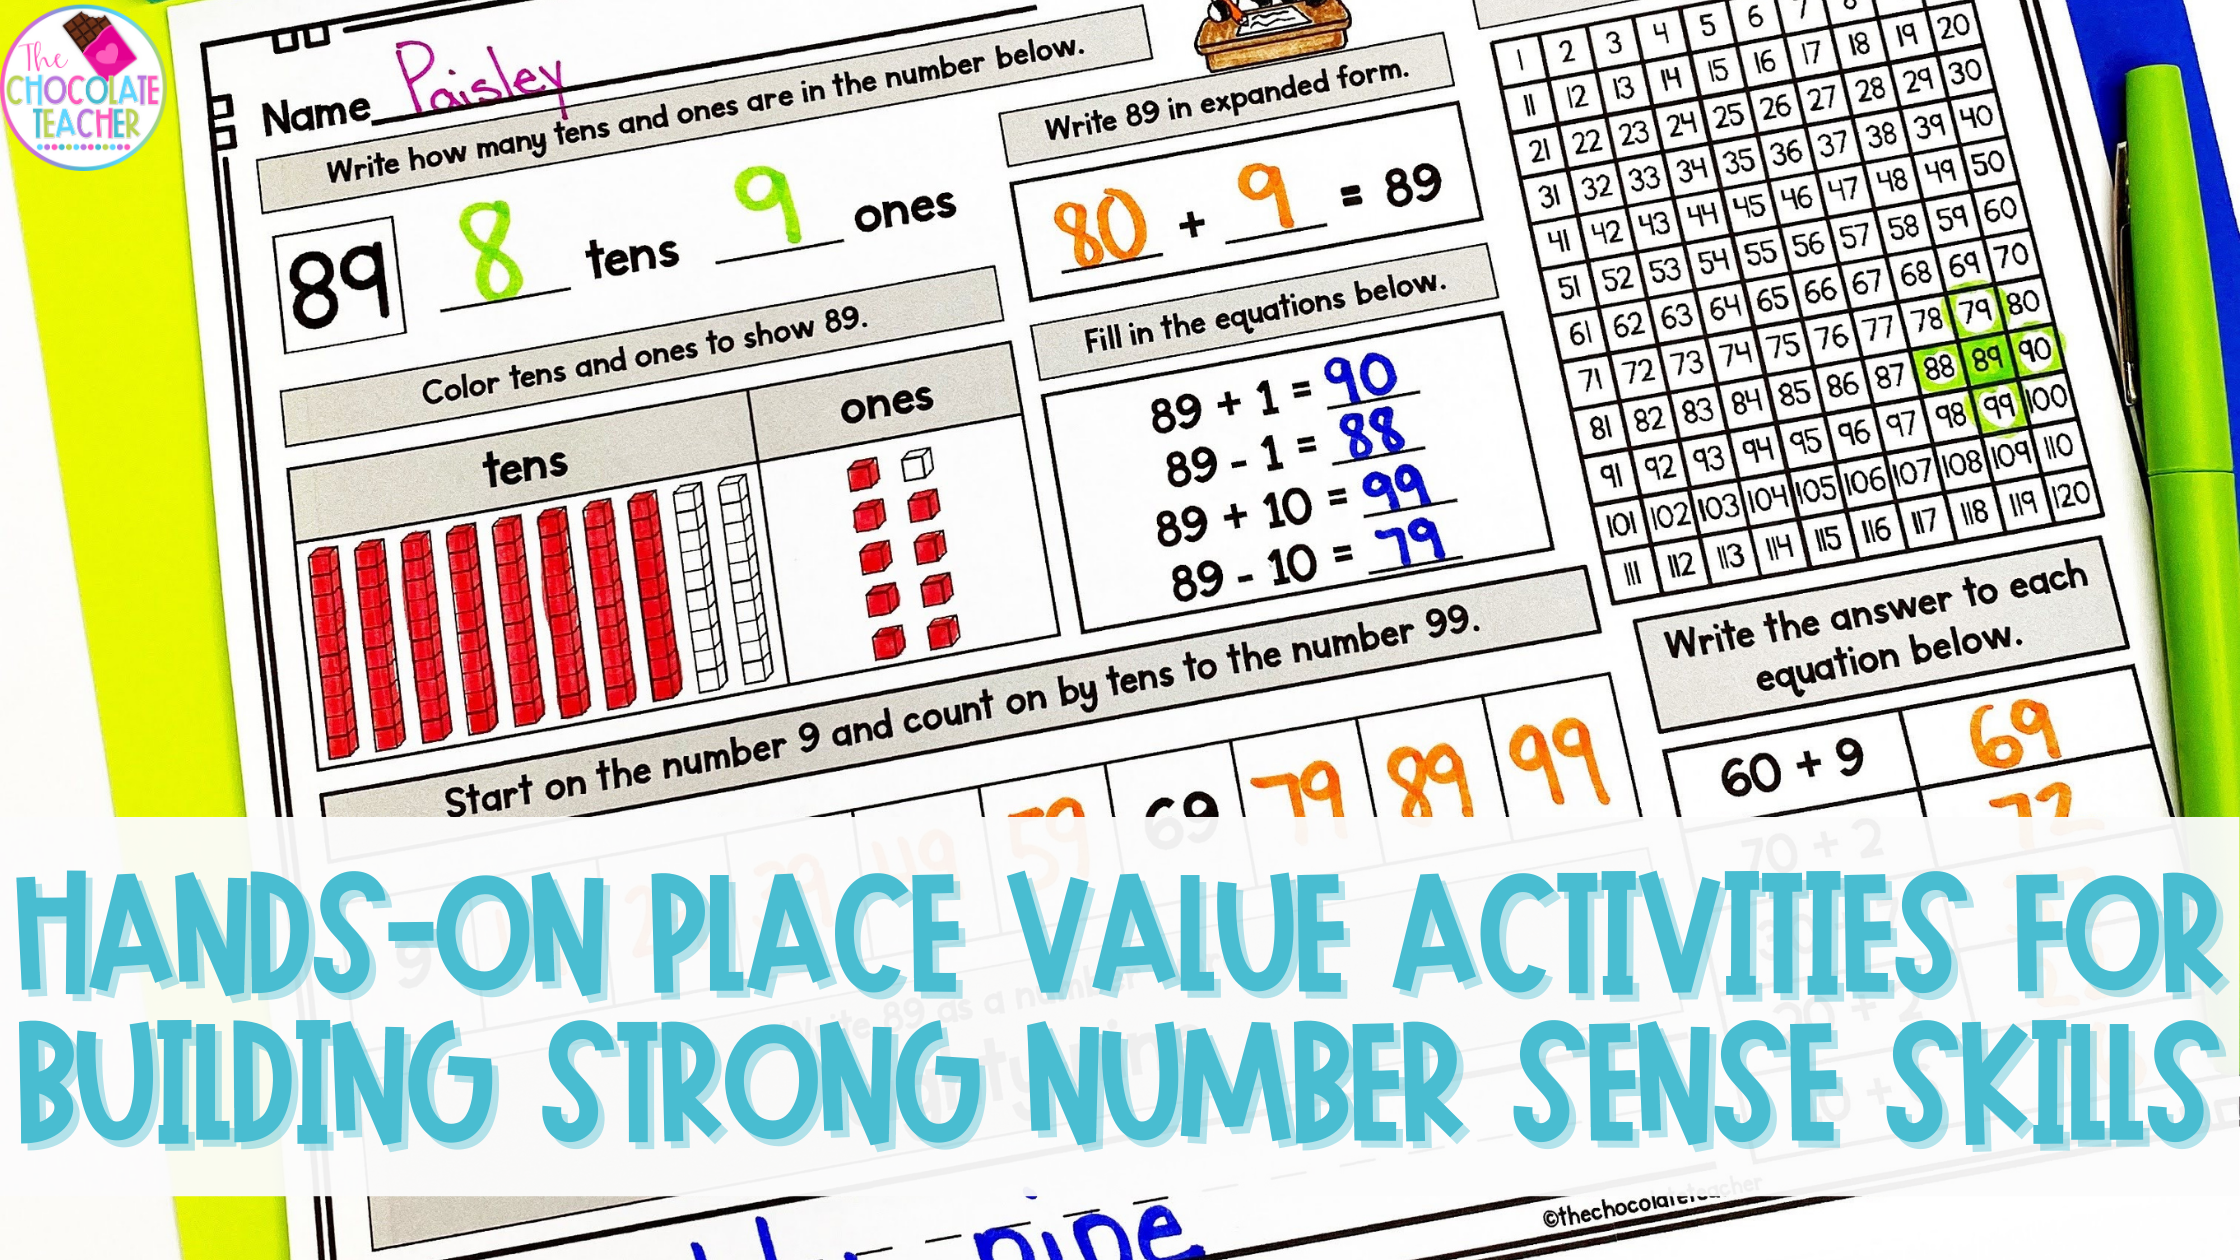 These hands-on place value activities will help your students build strong number sense skills they can use throughout their lives.